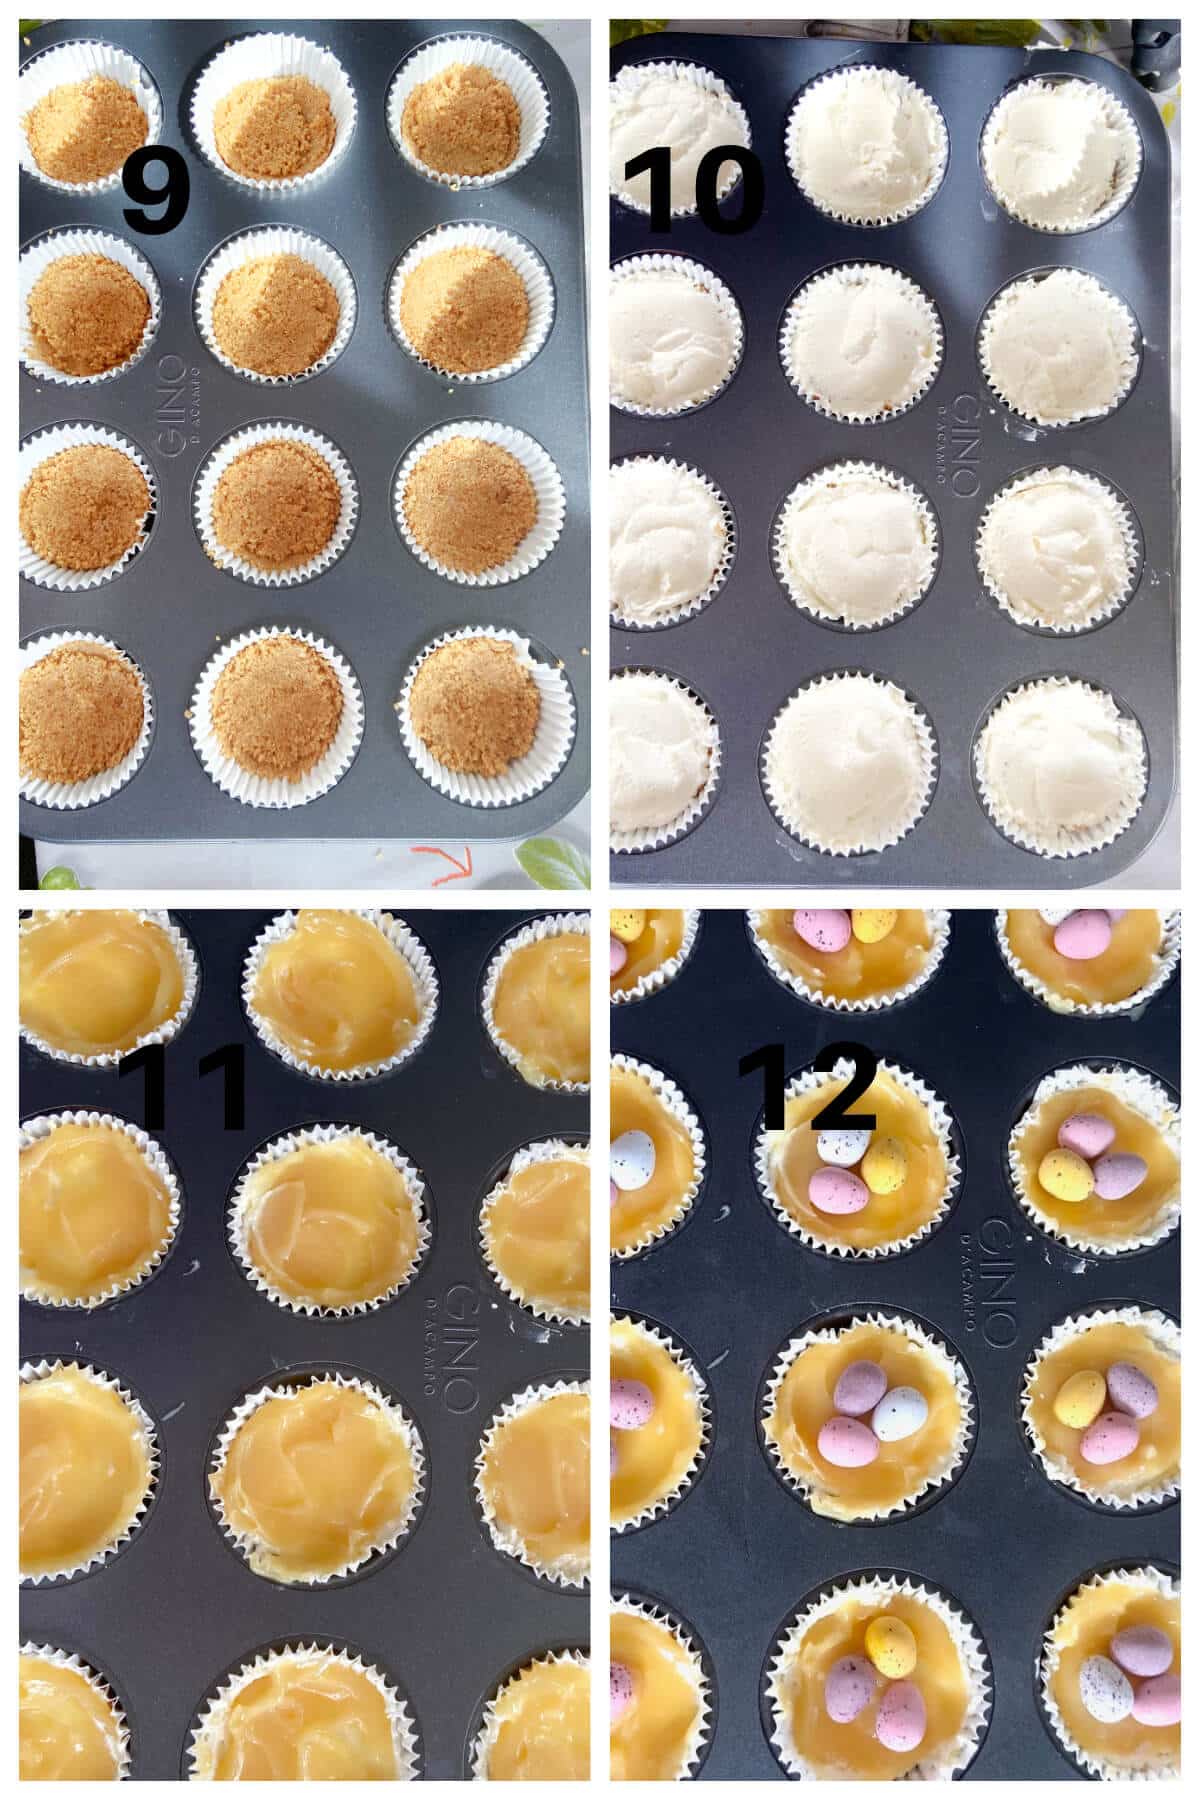 Collage of 4 photos to show how to assemble the mini cheesecakes.